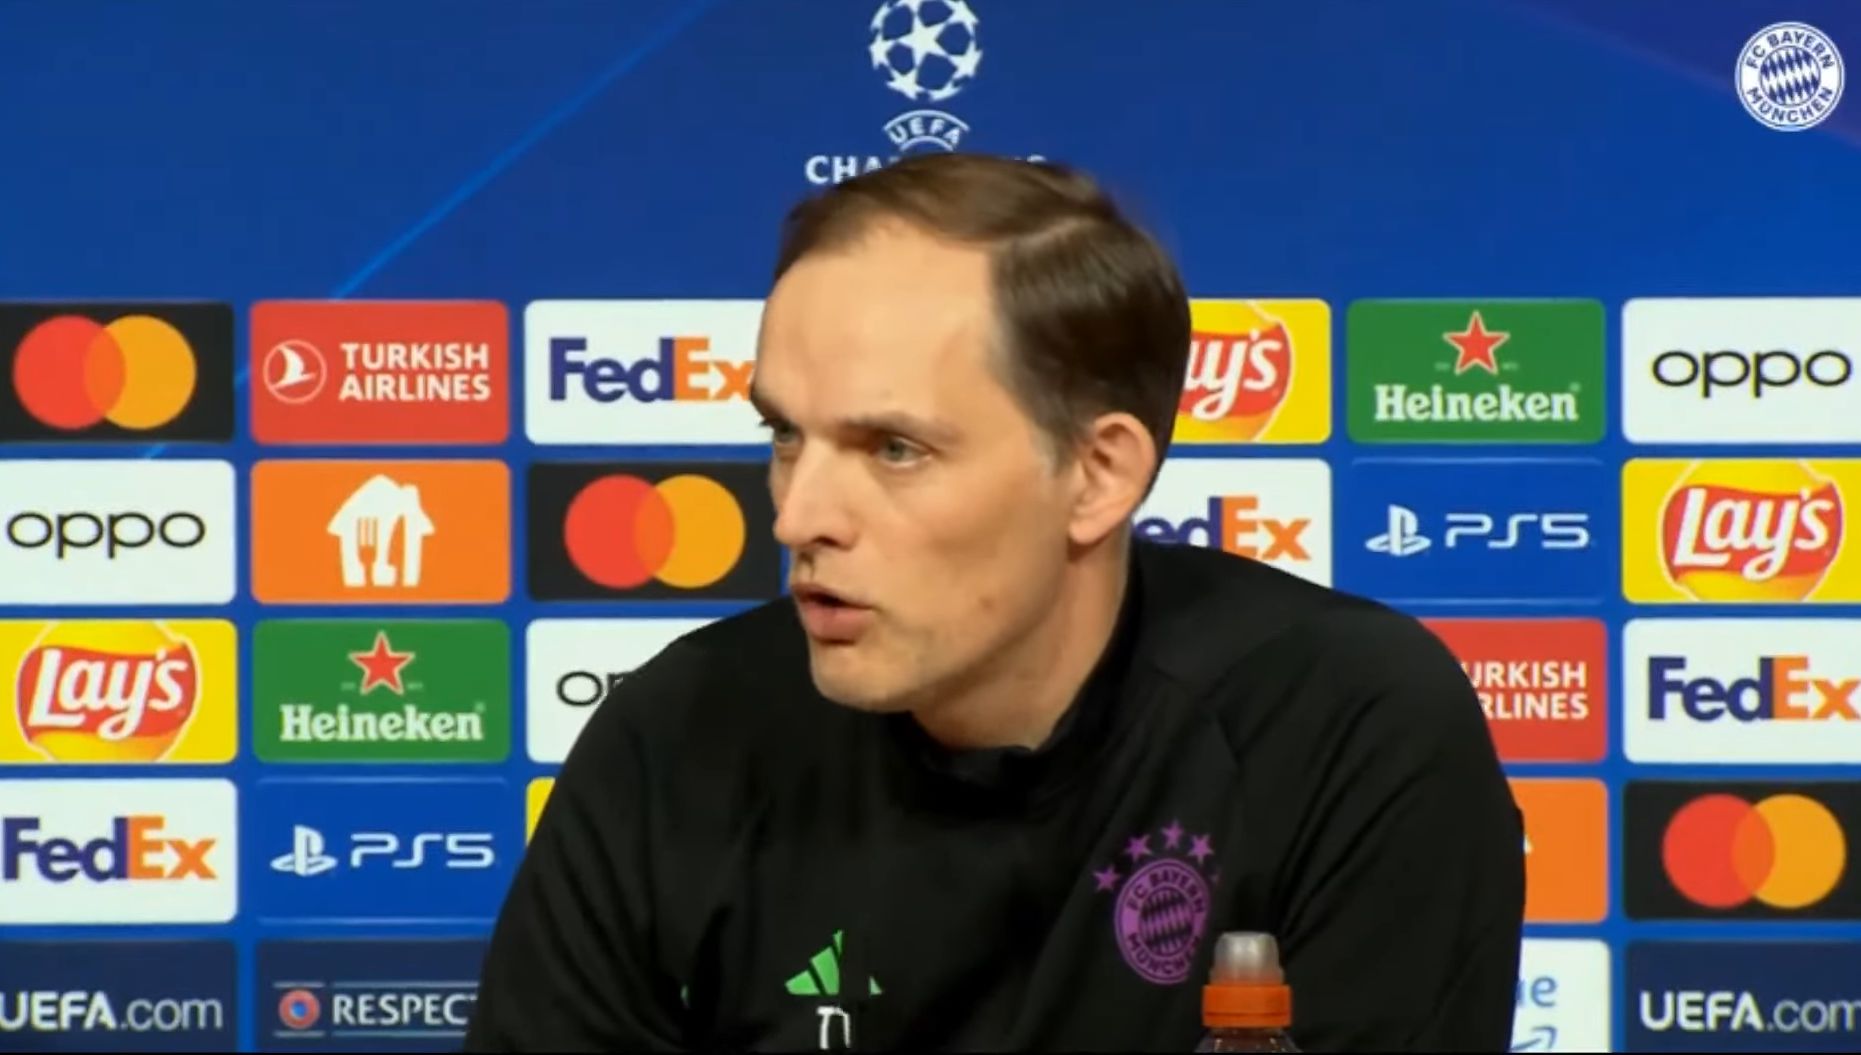 Thomas Tuchel says Bayern Munich star will score against Real Madrid – ‘I don’t know how, but it will happen’